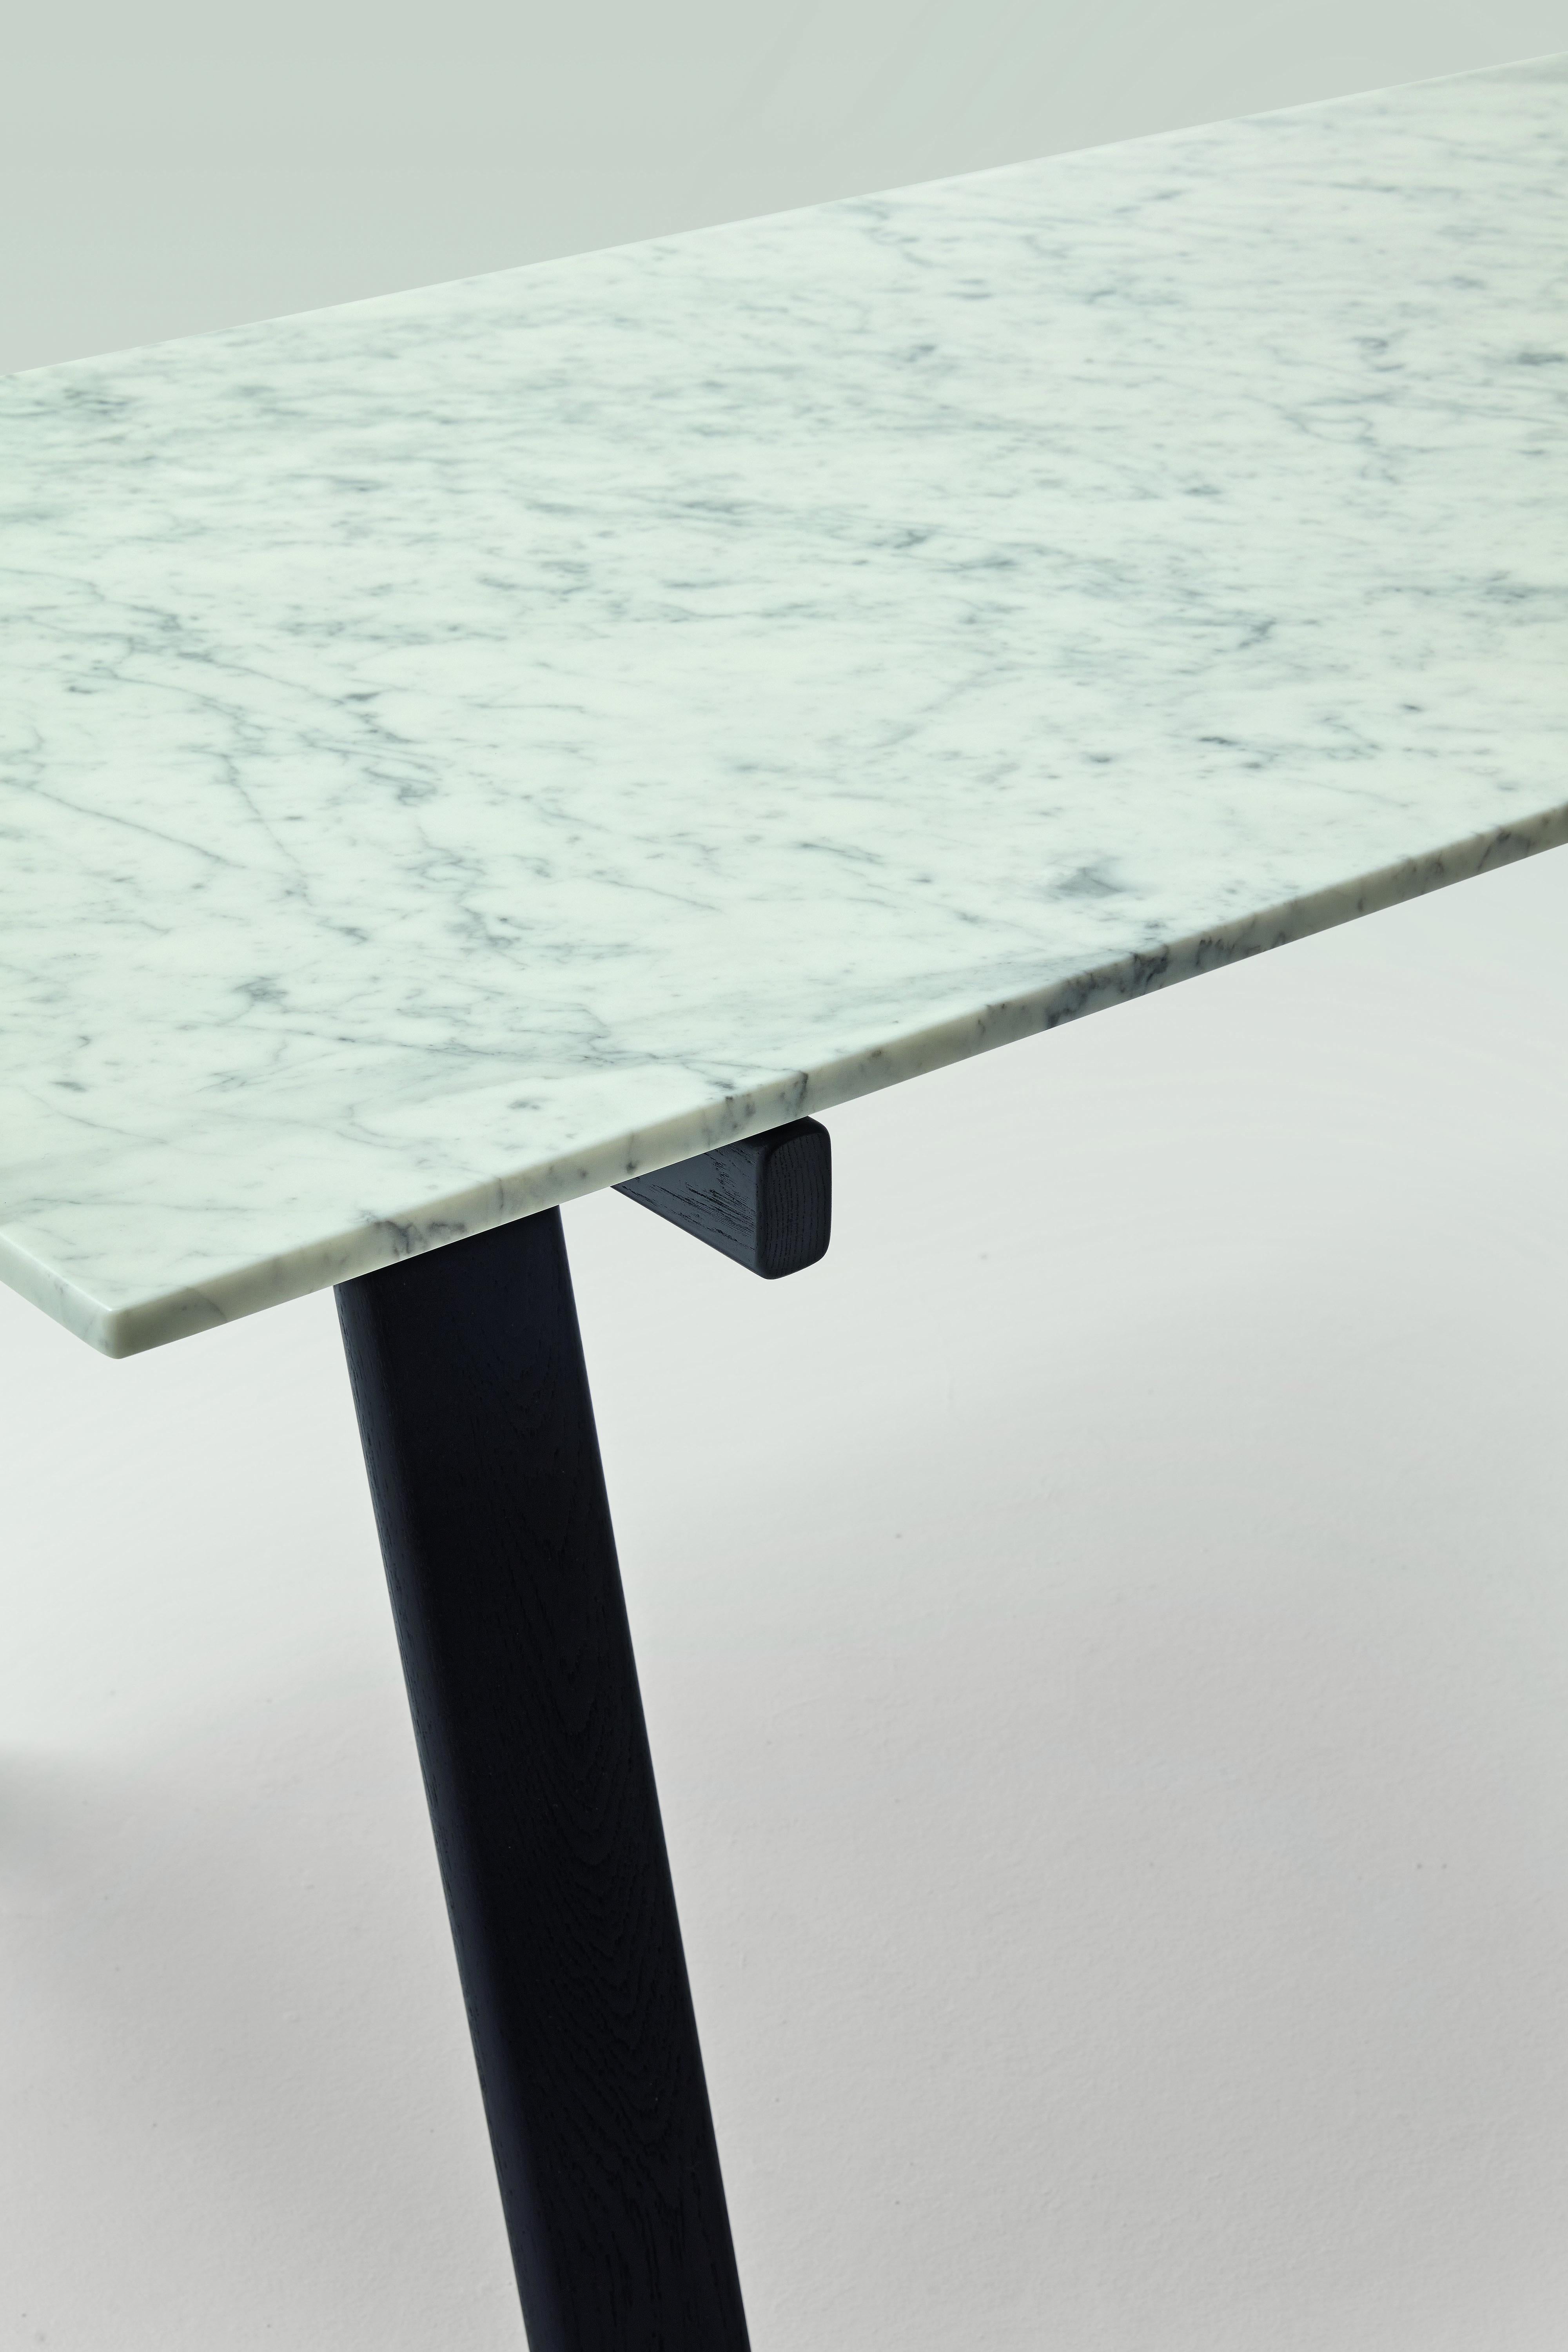 Zanotta Large Ambrosiano Table in Carrara Marble Top with Black Frame by Mist-o

Trestles in solid natural oak or painted black with open pore. Matt black painted stainless steel spars. Top available either in 1/2” thick smoky grey tempered plate